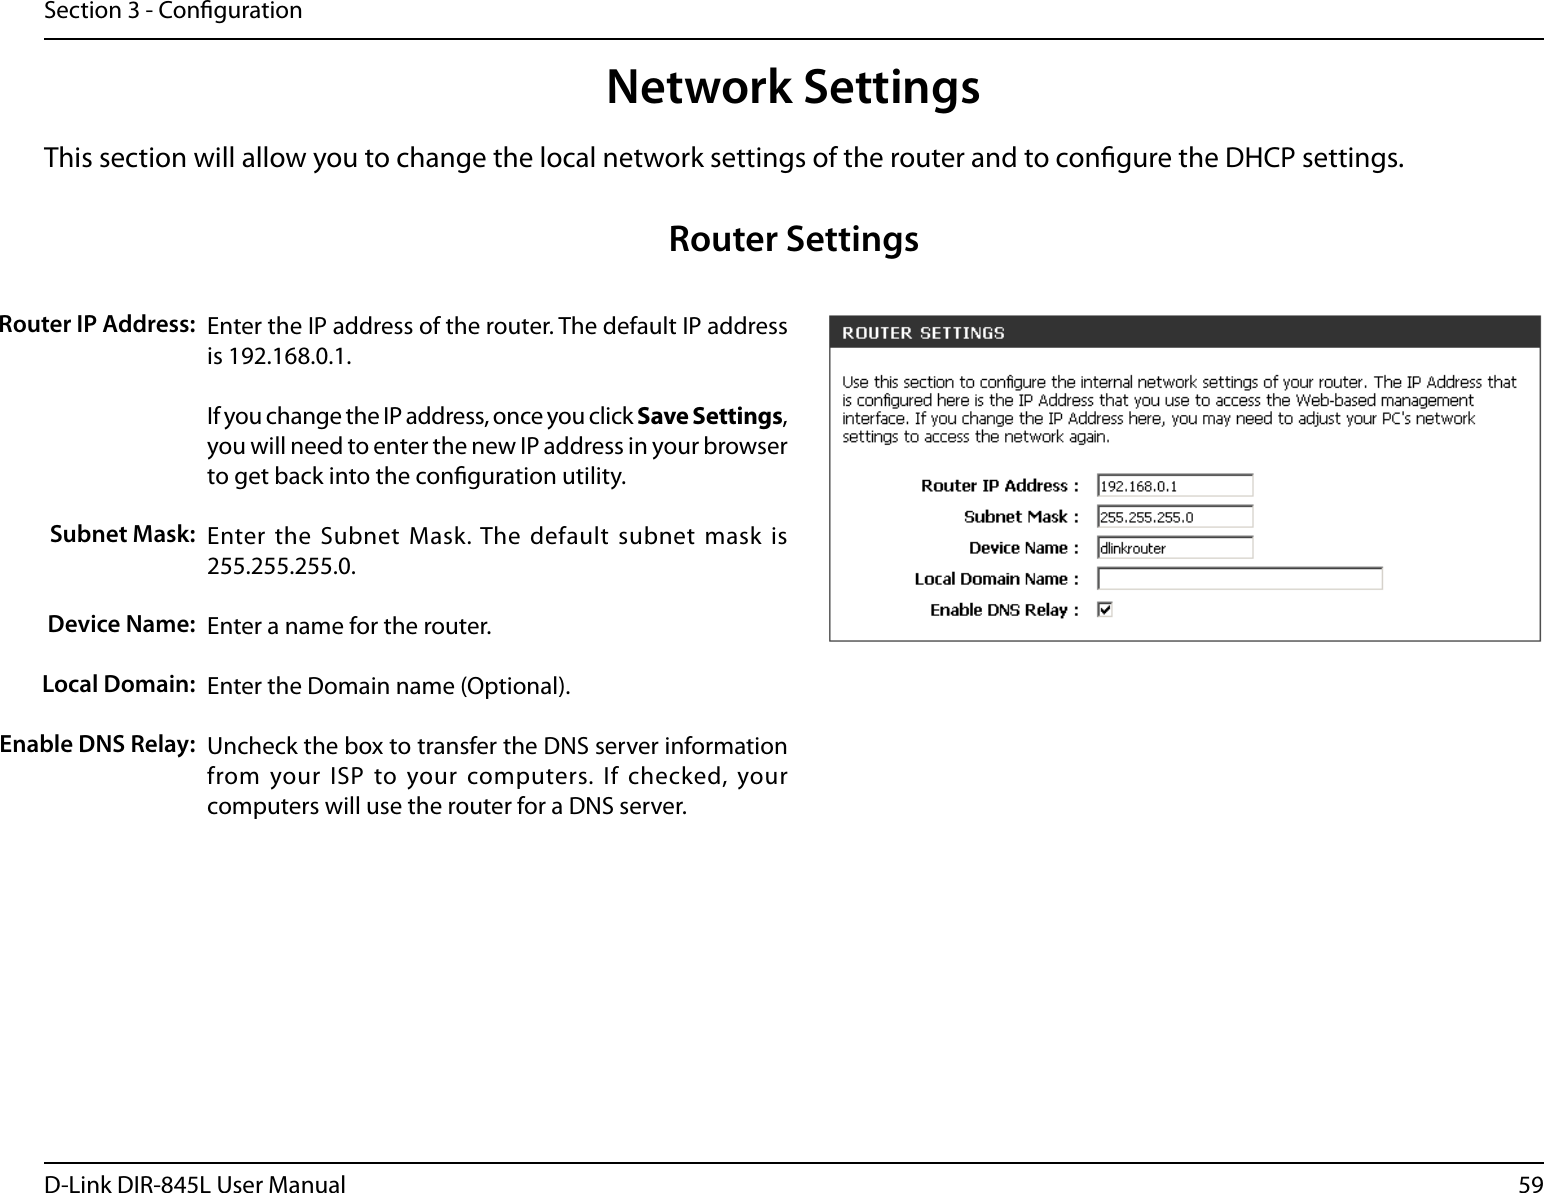 59D-Link DIR-845L User ManualSection 3 - CongurationThis section will allow you to change the local network settings of the router and to congure the DHCP settings.Network SettingsEnter the IP address of the router. The default IP address is 192.168.0.1.If you change the IP address, once you click Save Settings, you will need to enter the new IP address in your browser to get back into the conguration utility.Enter the Subnet  Mask. The default  subnet  mask is 255.255.255.0.Enter a name for the router.Enter the Domain name (Optional).Uncheck the box to transfer the DNS server information from your ISP to your computers. If  checked, your computers will use the router for a DNS server.Router IP Address:Subnet Mask:Device Name:Local Domain:Enable DNS Relay:Router Settings